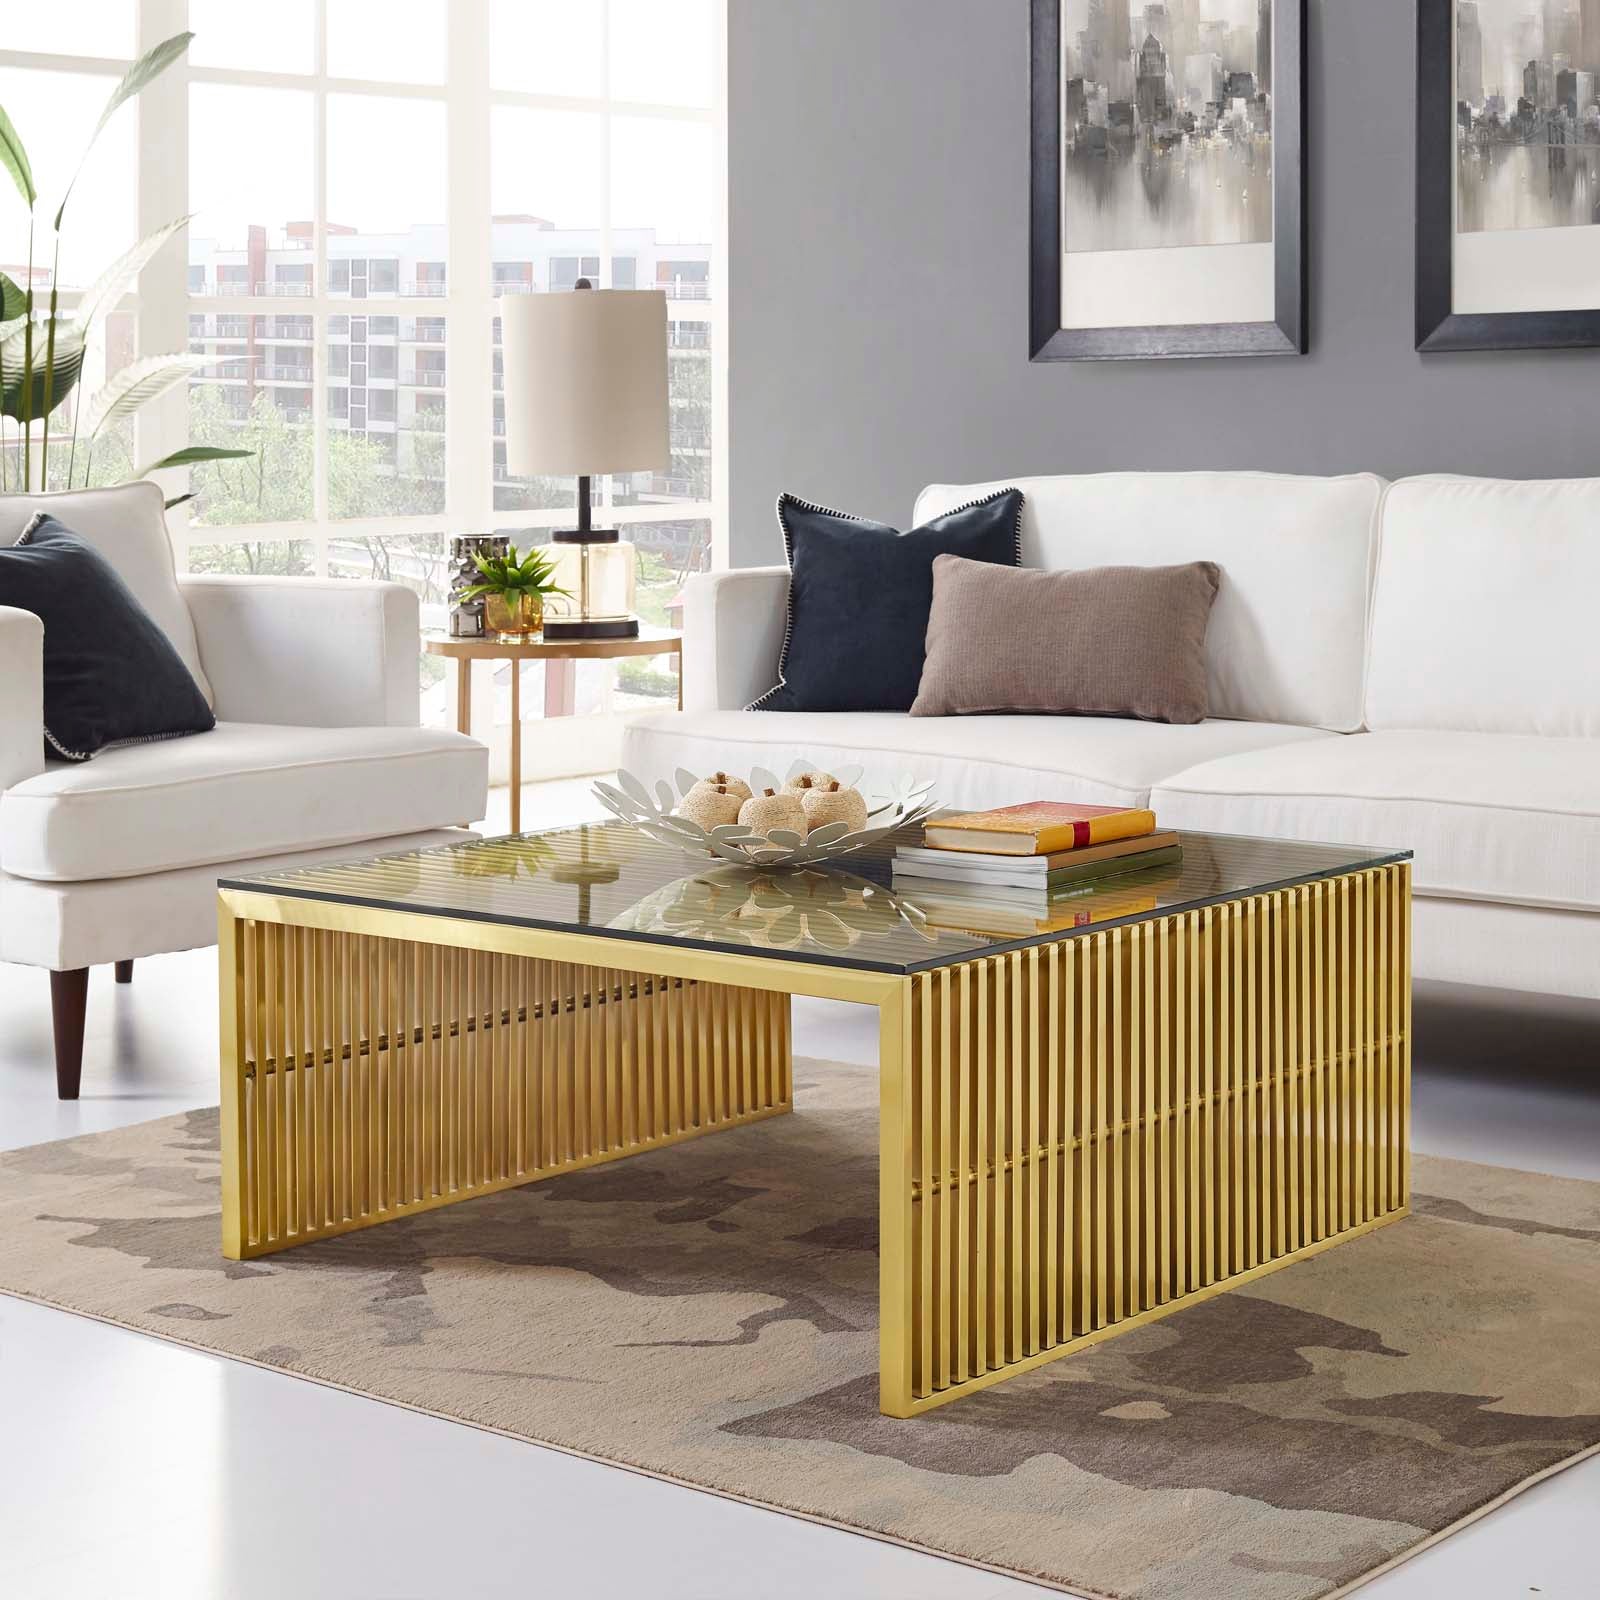 Gridiron Stainless Steel Coffee Table - East Shore Modern Home Furnishings